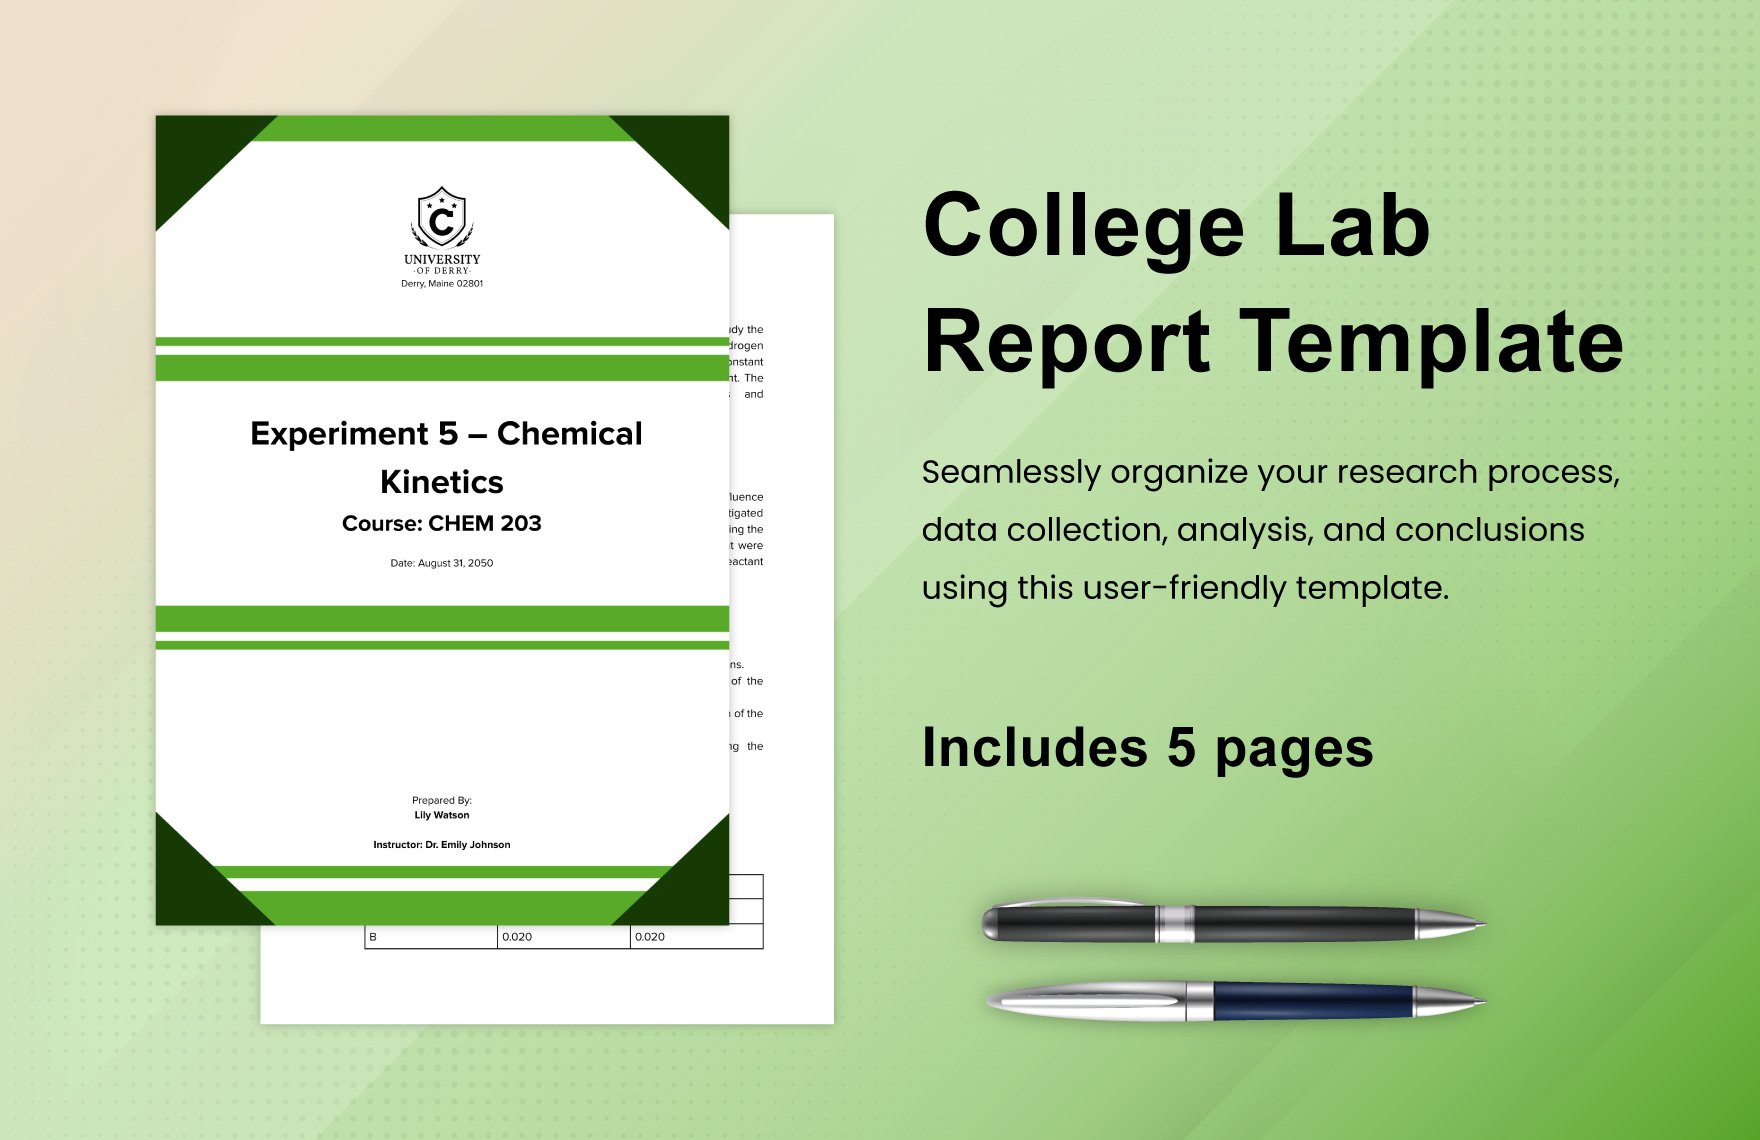 College Lab Report Template